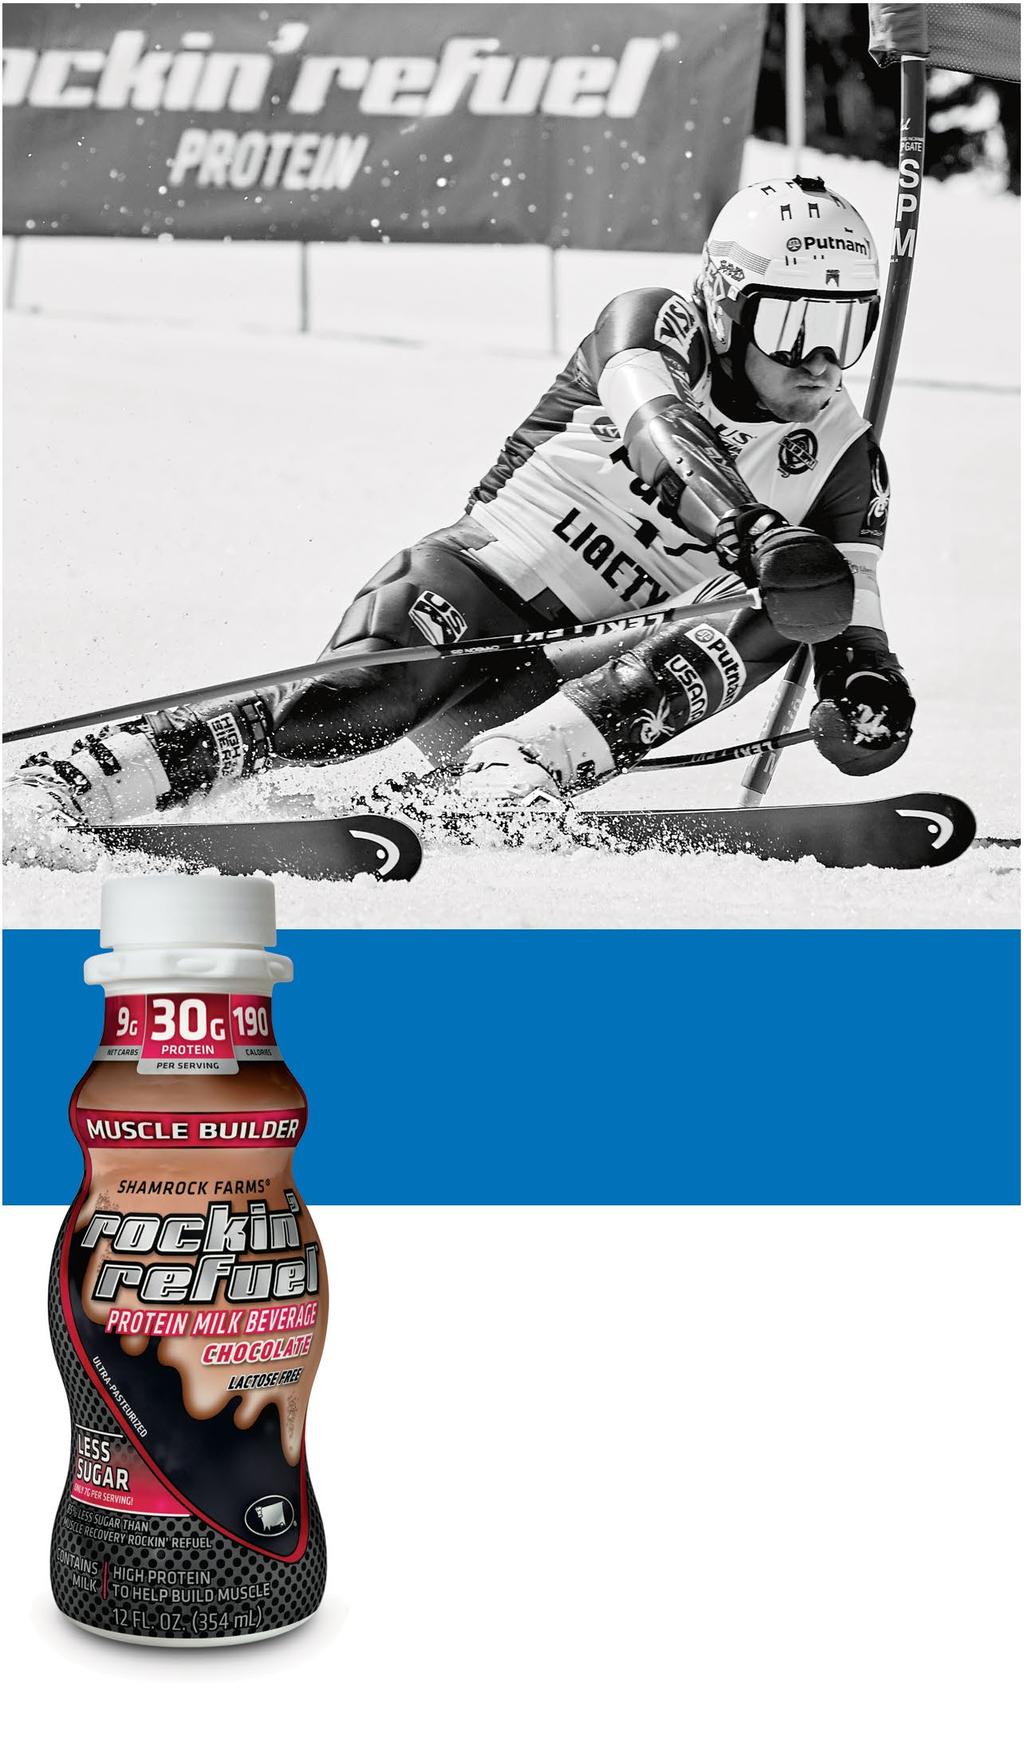 Ted Ligety 5x World Champion High protein for high performance. World-class athletes need the right amount of protein to help them perform at the highest level. And Rockin Refuel has loads of it.